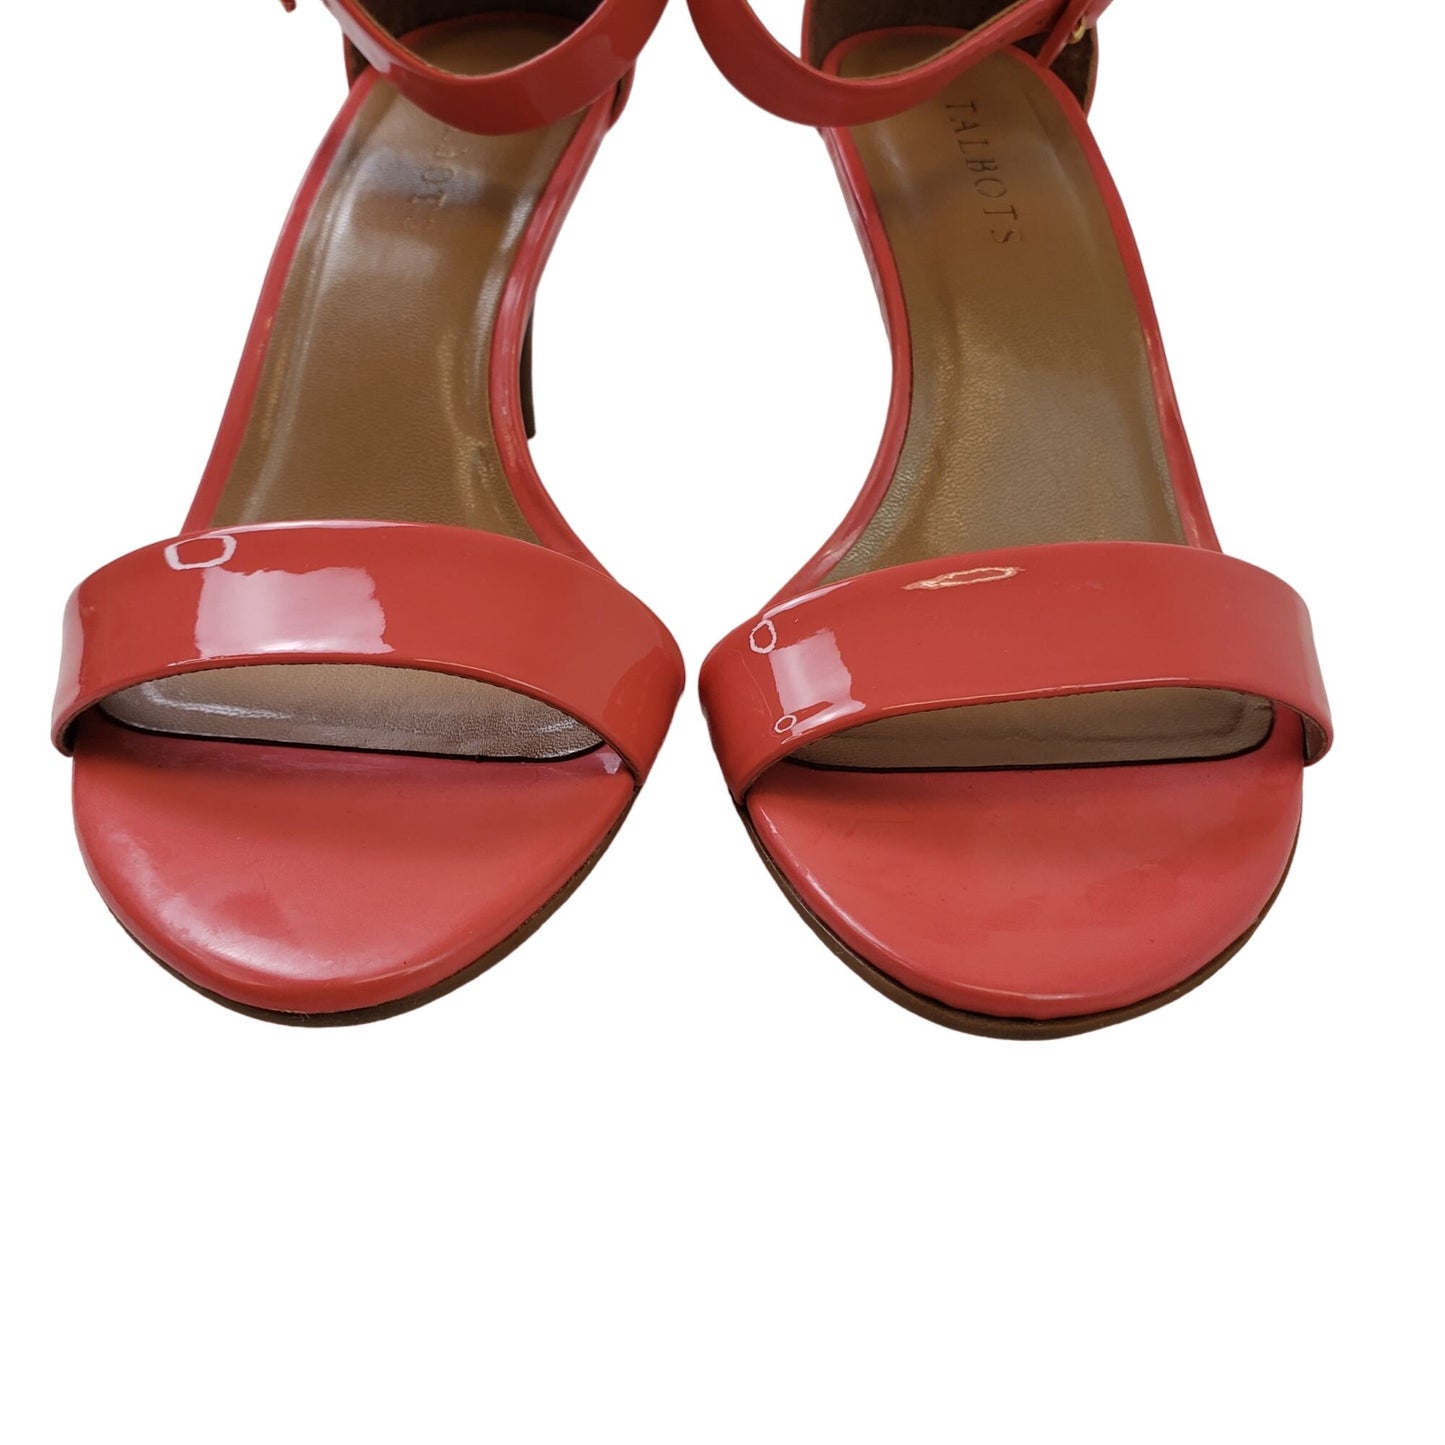 Talbots Patent Leather Ankle Strap Heels in a Coral Color Size 8.5